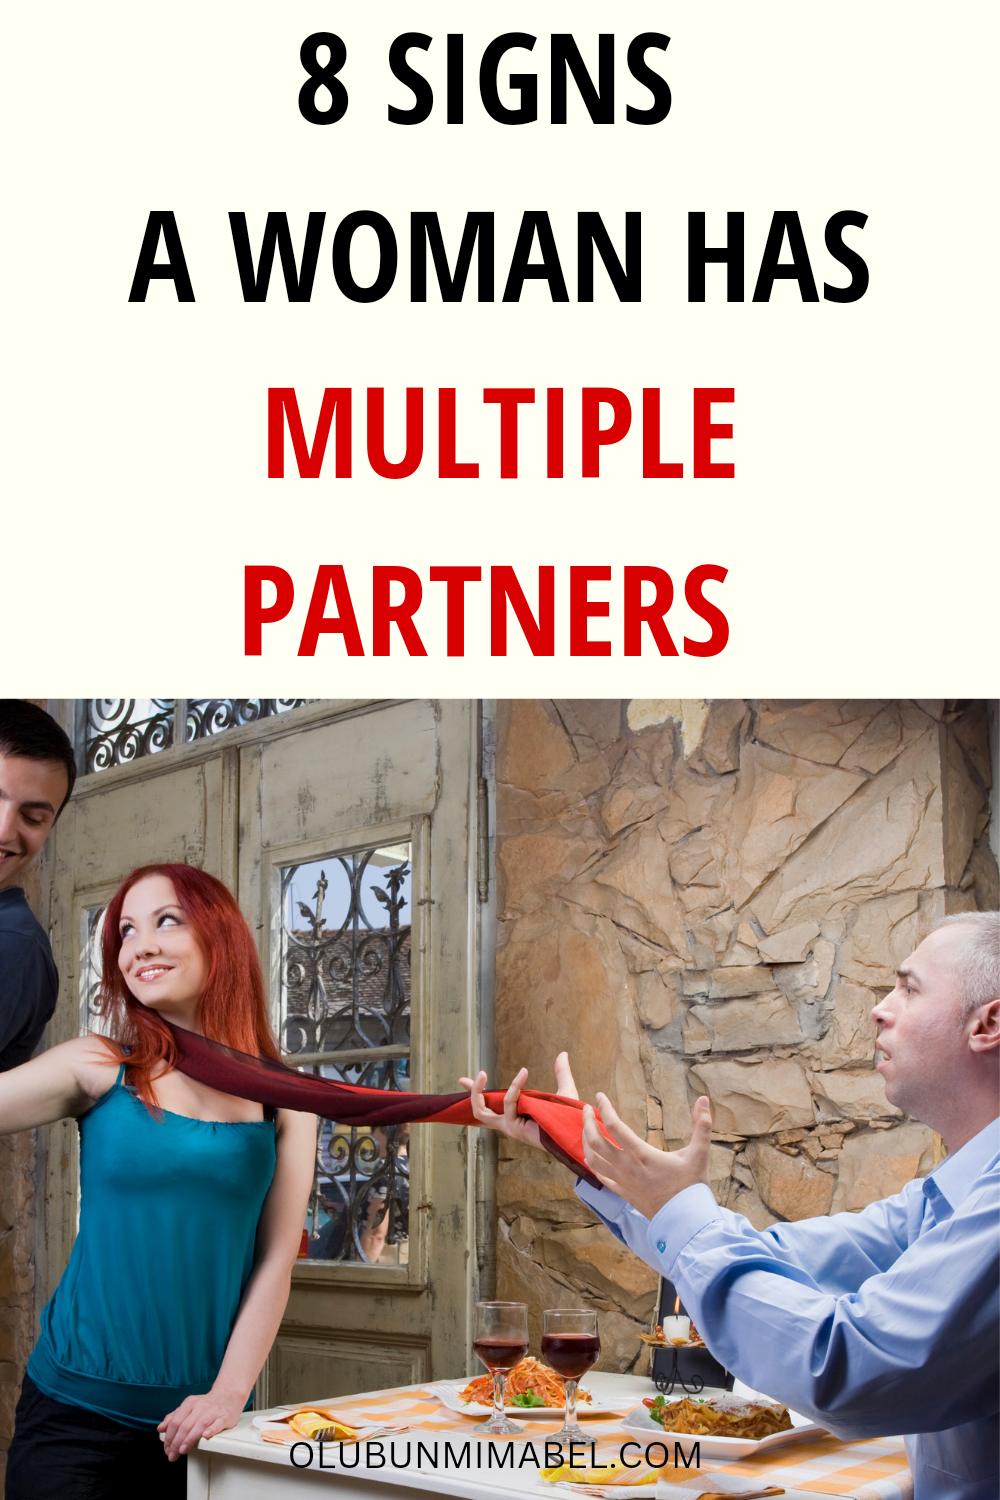 How To Tell If a Woman Has Multiple Partners